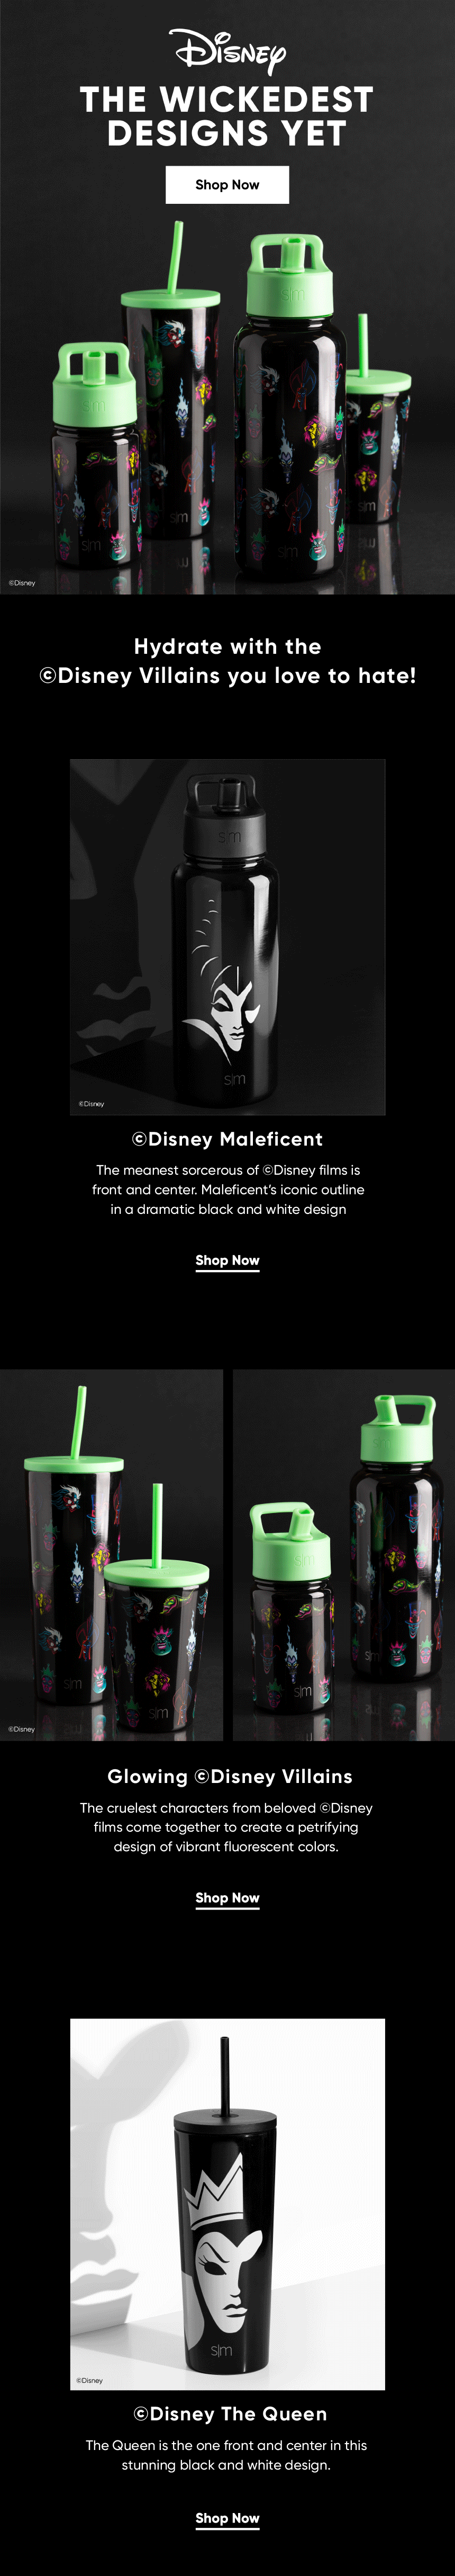 New! Disney Villains Collection Is Here - Simple Modern